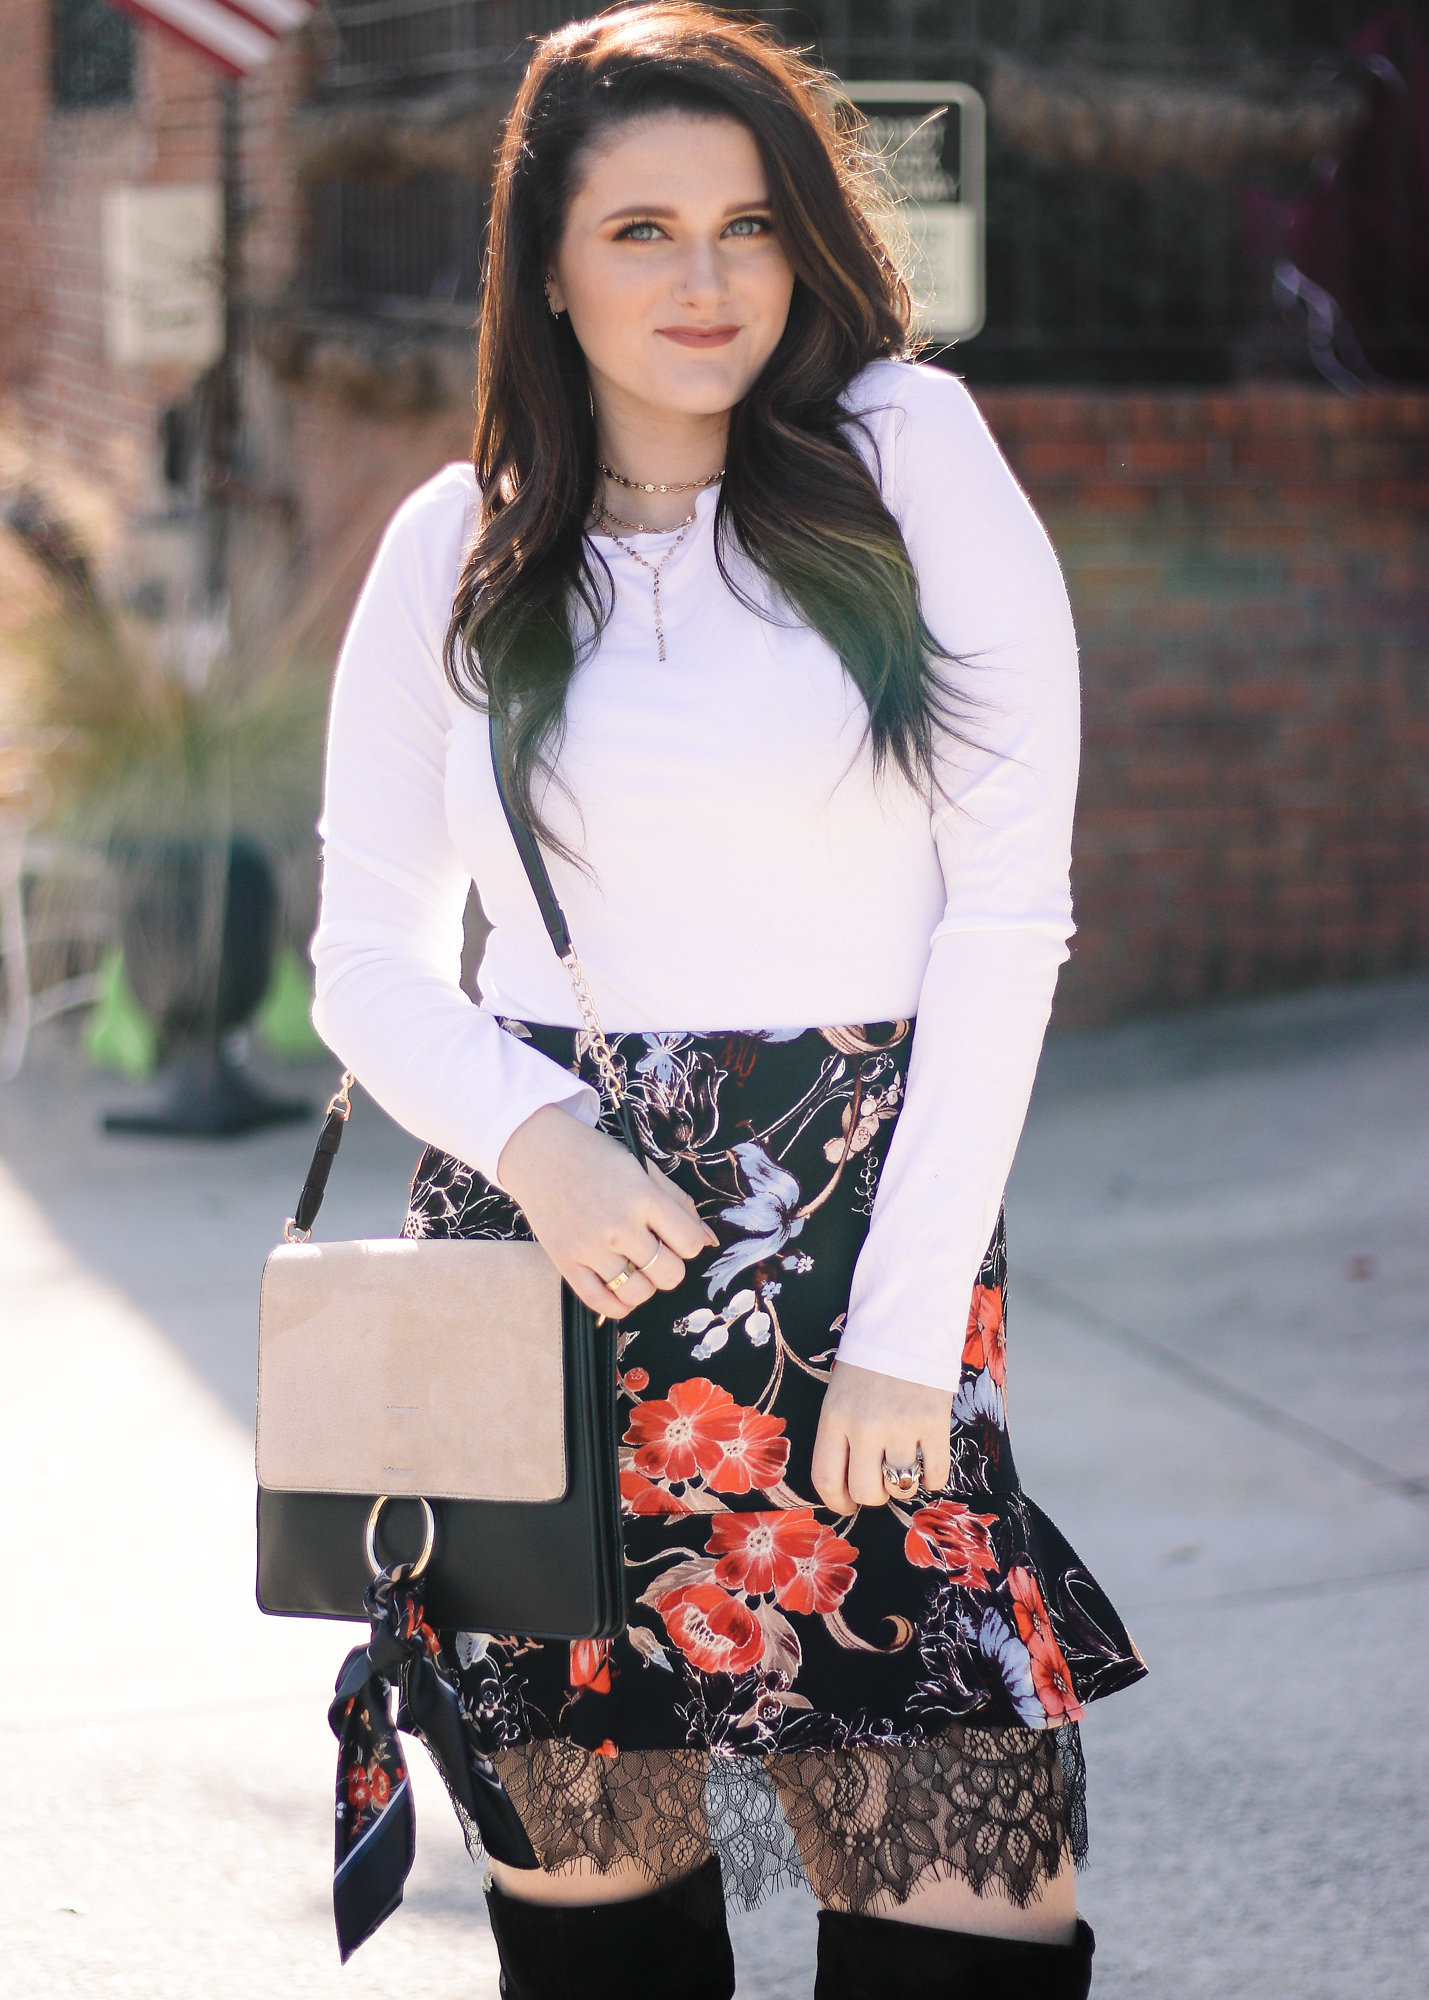 The Perfect Floral Skirt for Work